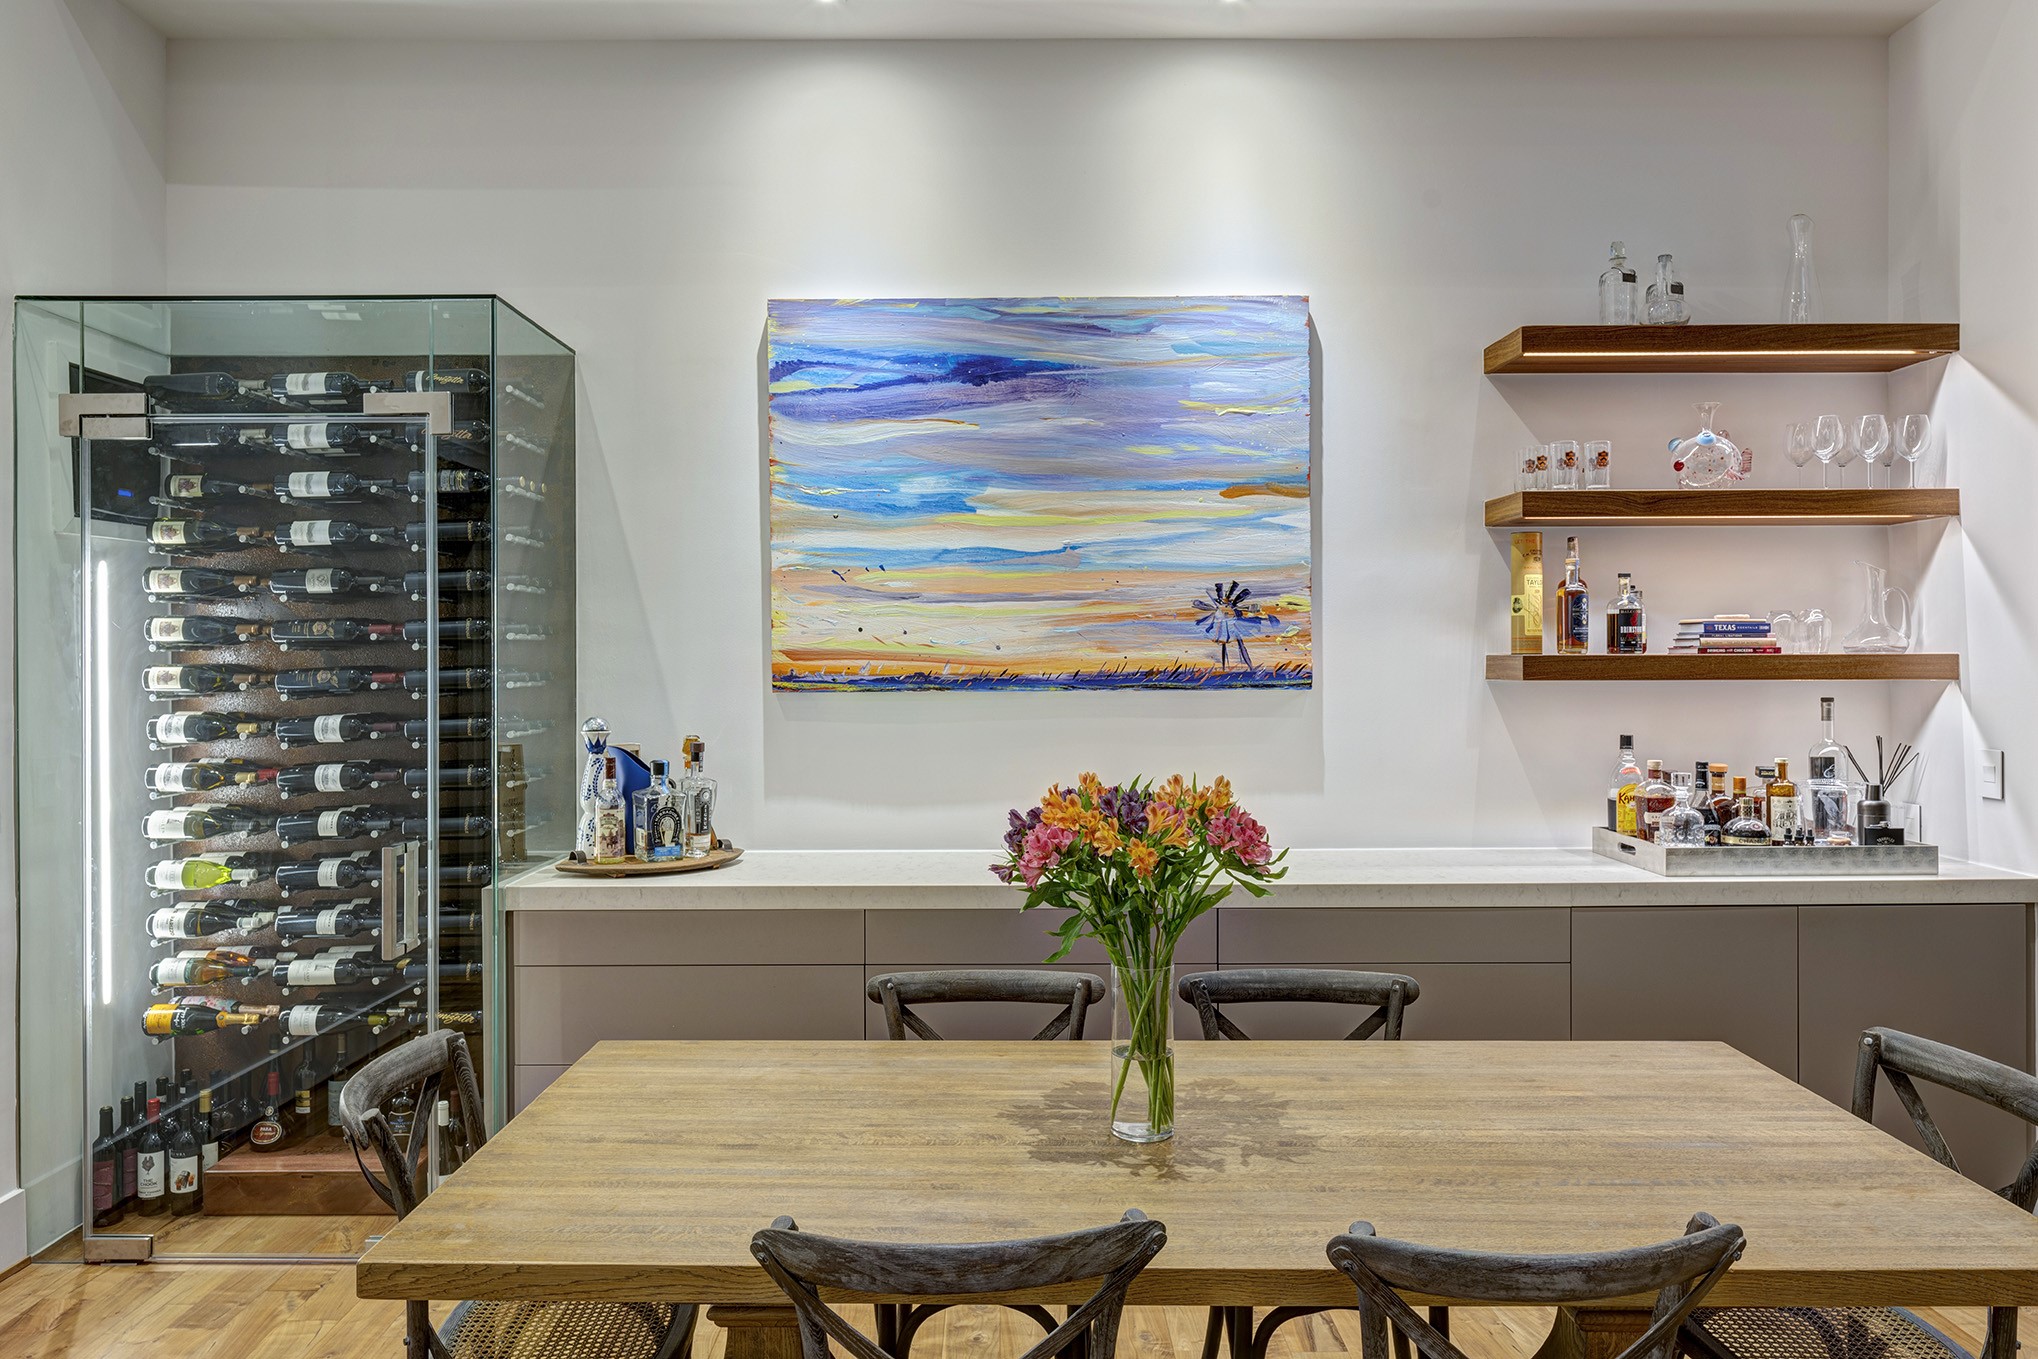 Entertain in style! Dining area off the kitchen is ideal for large gatherings. The 125+ glass enclosed wine closet has it's own air-conditioned unit.